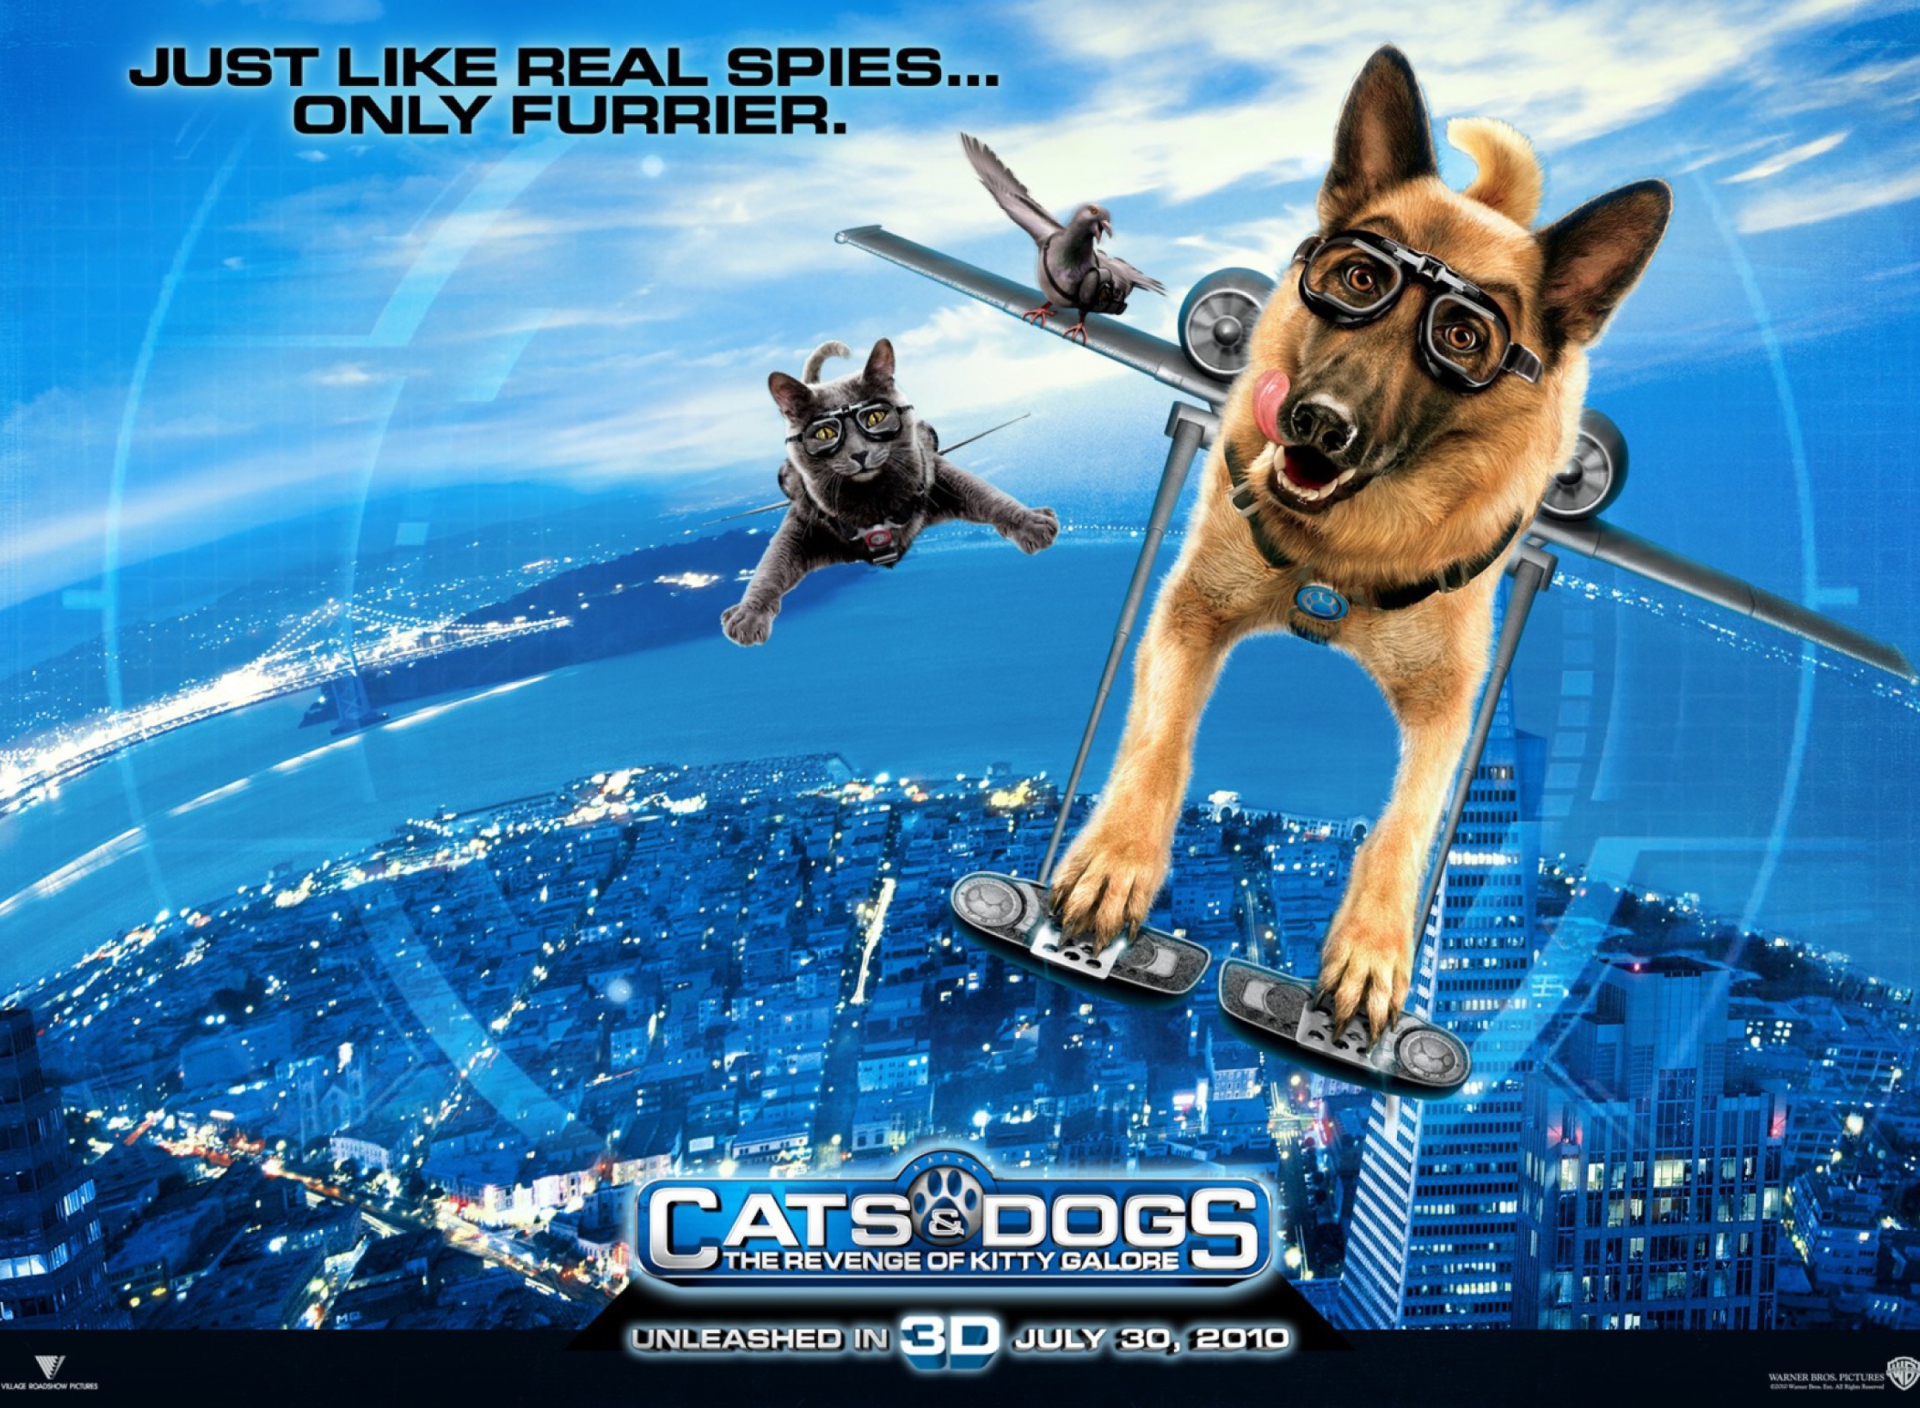 Cats & Dogs: The Revenge of Kitty Galore wallpaper 1920x1408